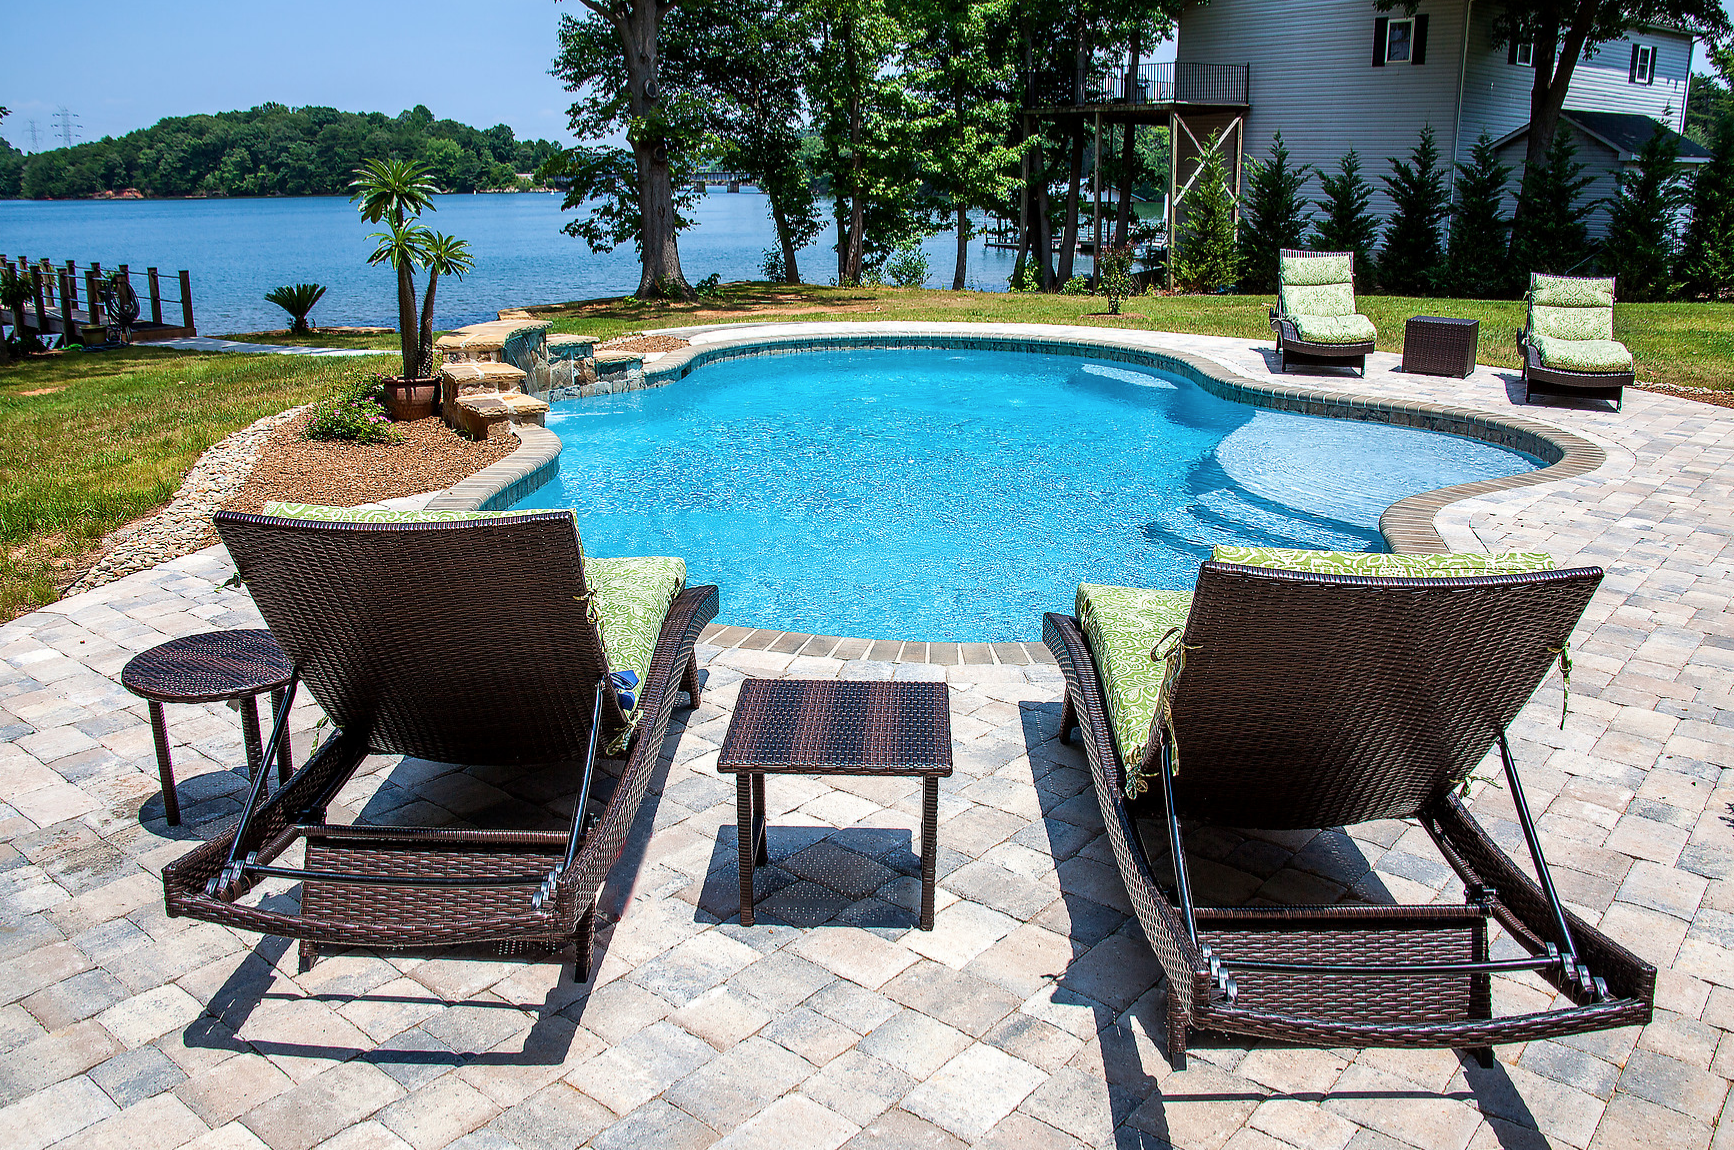 Lincolnton North Carolina Inground Concrete Pool Installation from CPC Pools Call us at 704-799-5236